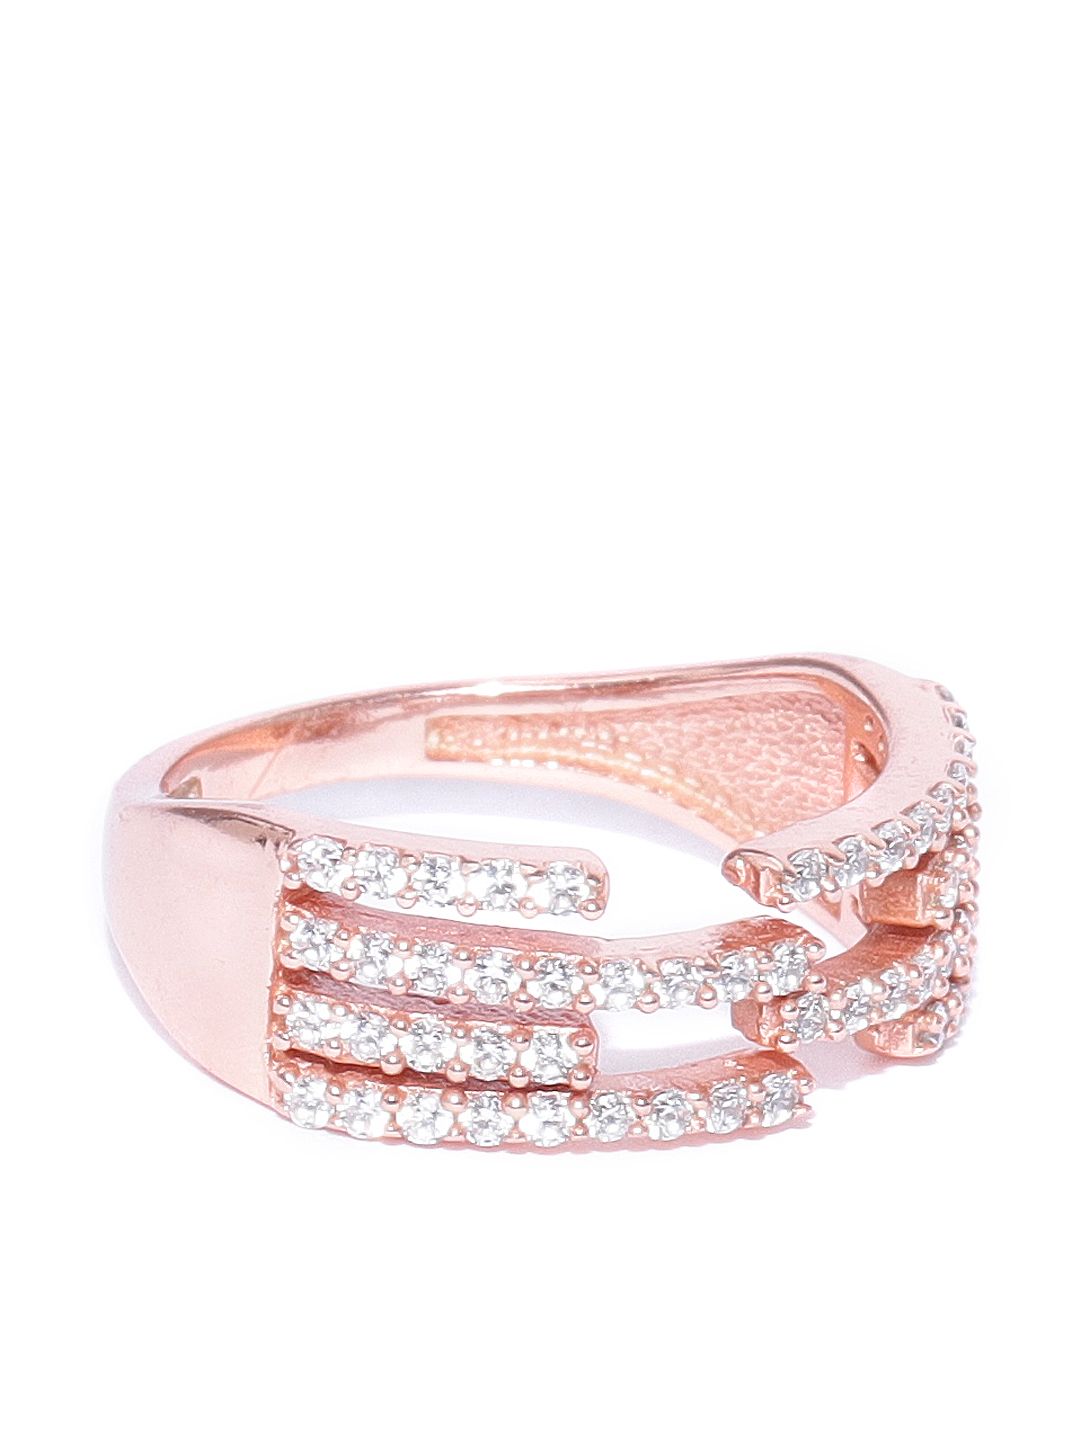 Carlton London Rose Gold-Plated CZ-studded Finger Ring Price in India